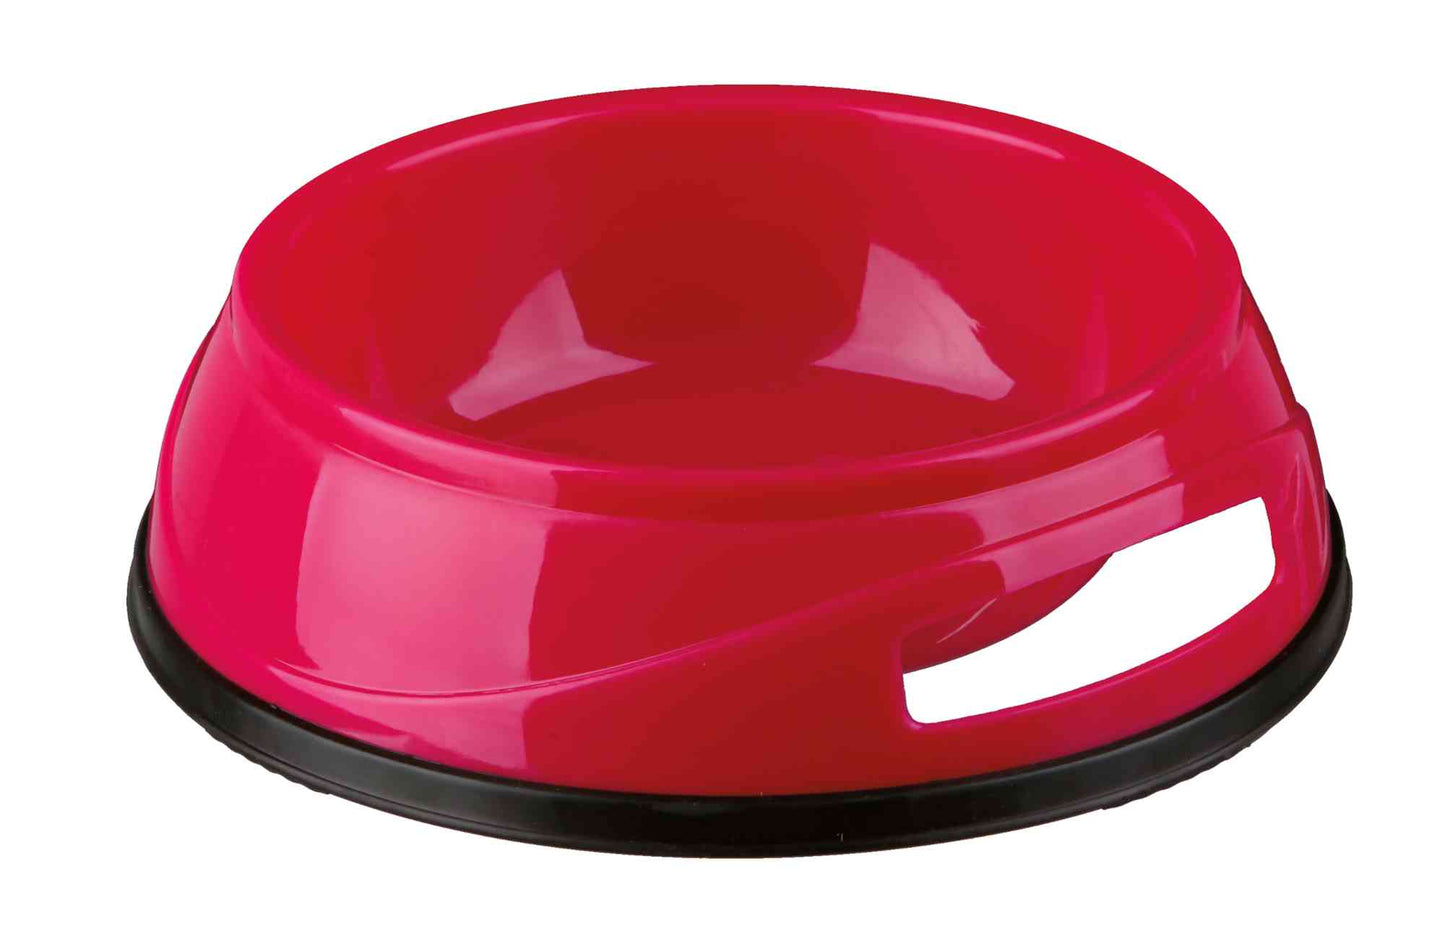 Trixie Bowl With Rubber Ring, Plastic, 0.5 Litre